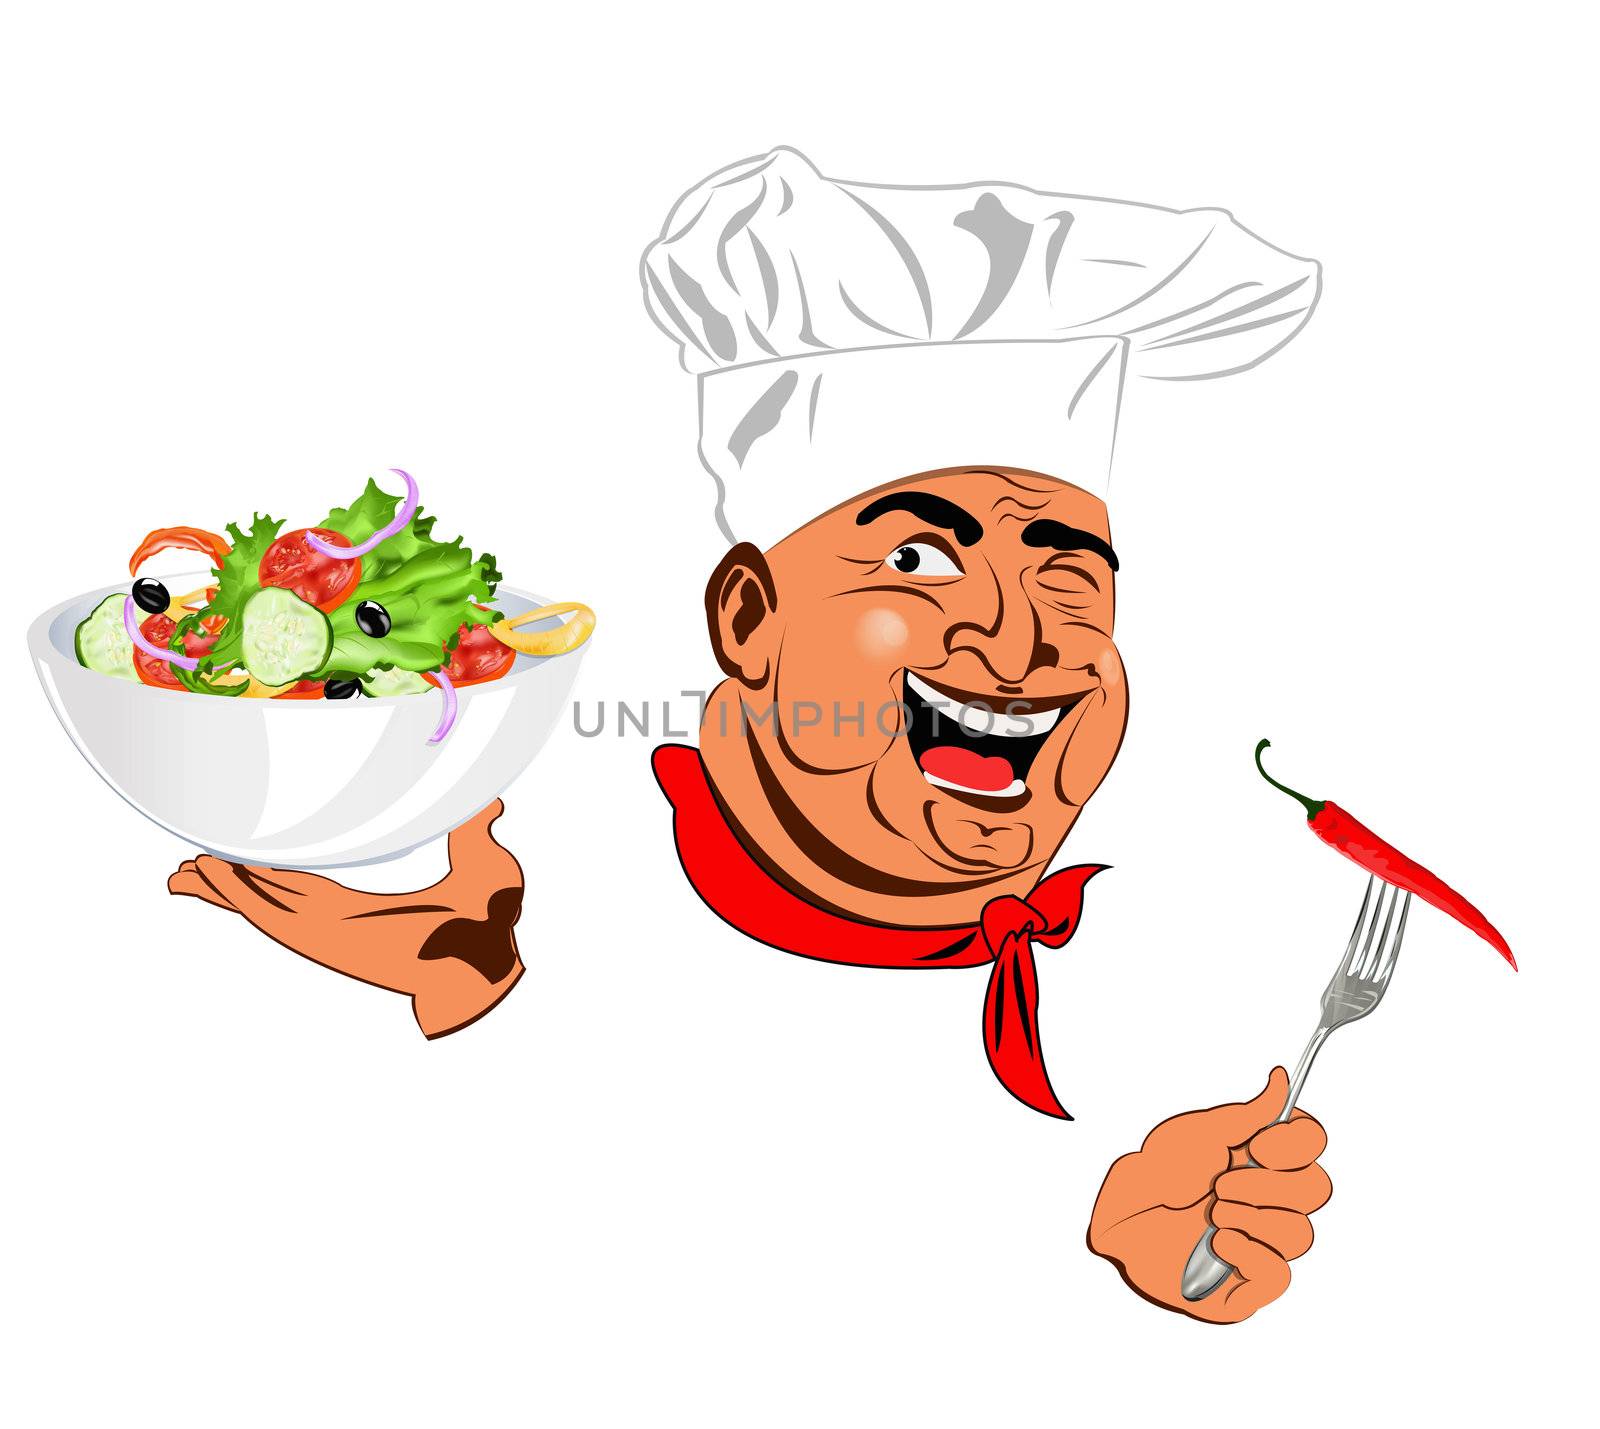 Funny Chef and best vegetarian vegetable by sergey150770SV